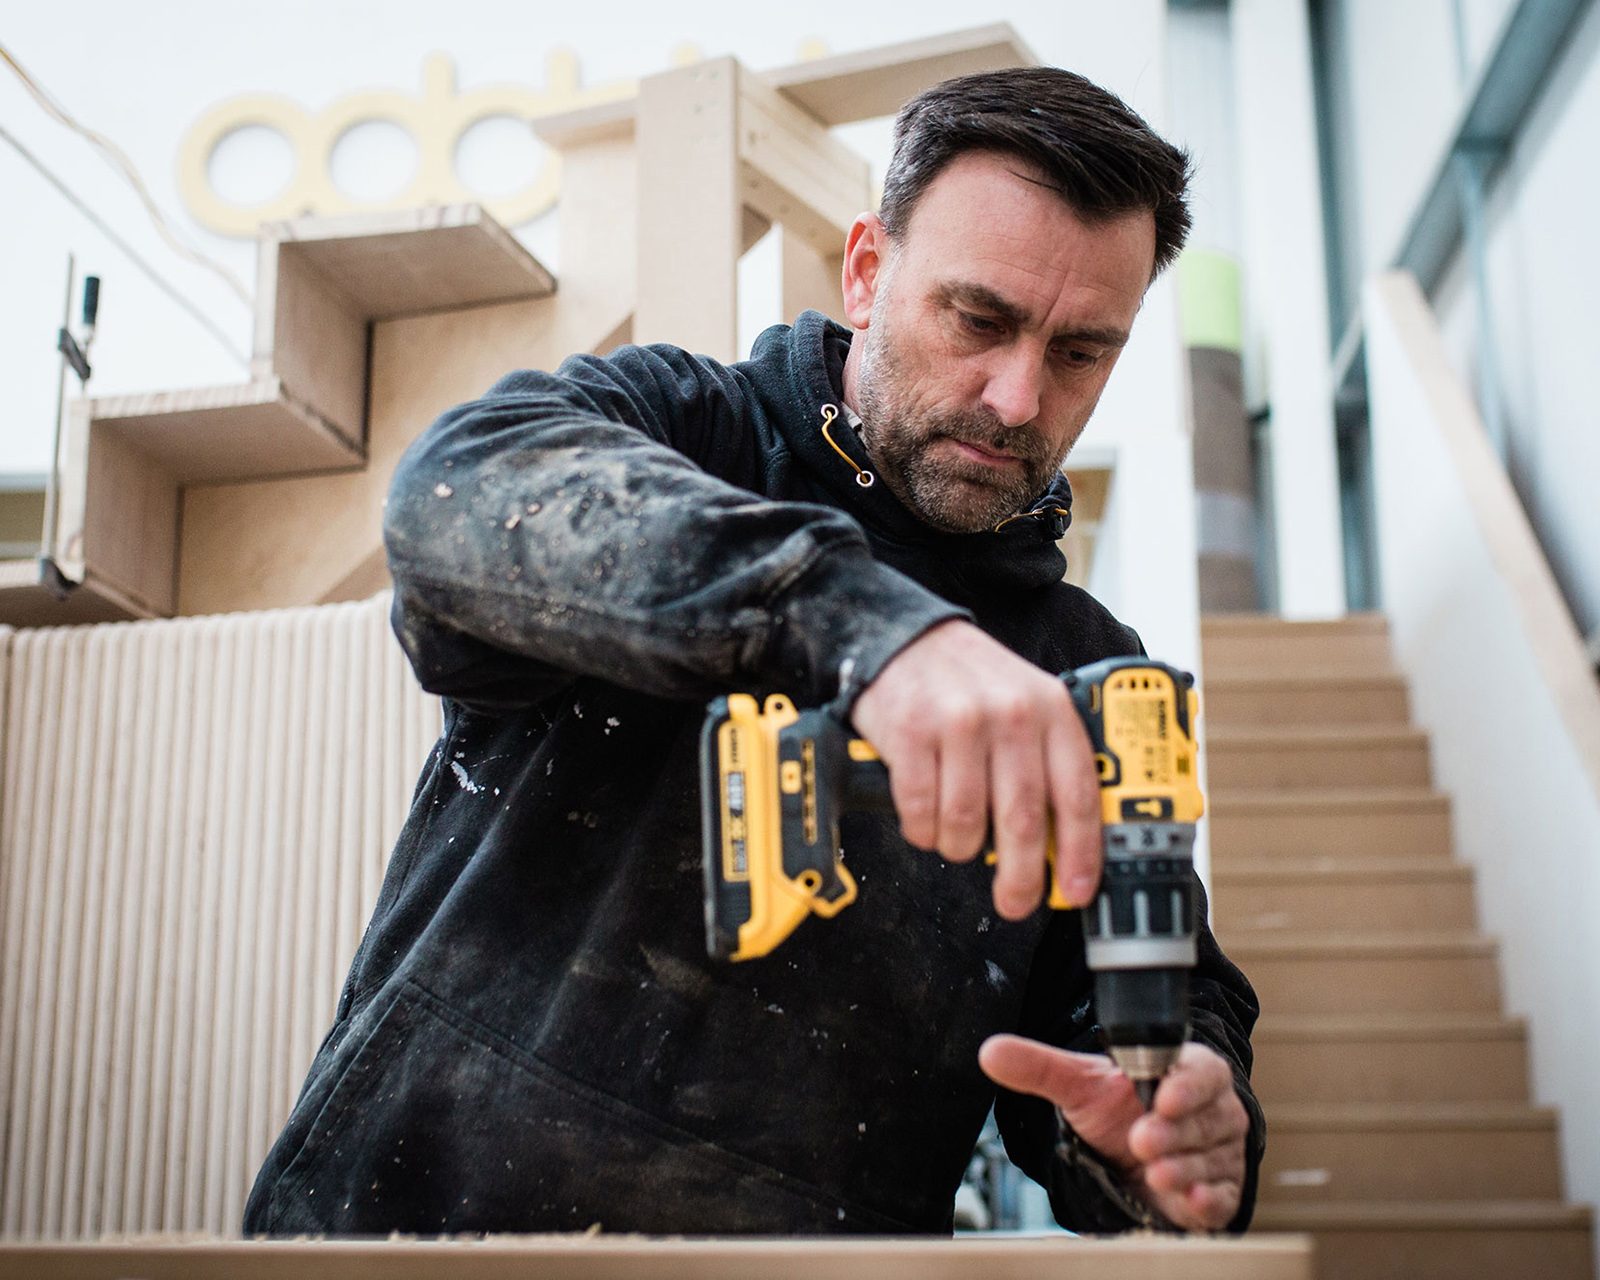 A focused man with a beard, wearing a dirty black jacket, uses a yellow power drill on a piece of wood at a construction site with brand design cardboard and wooden structures in the background.